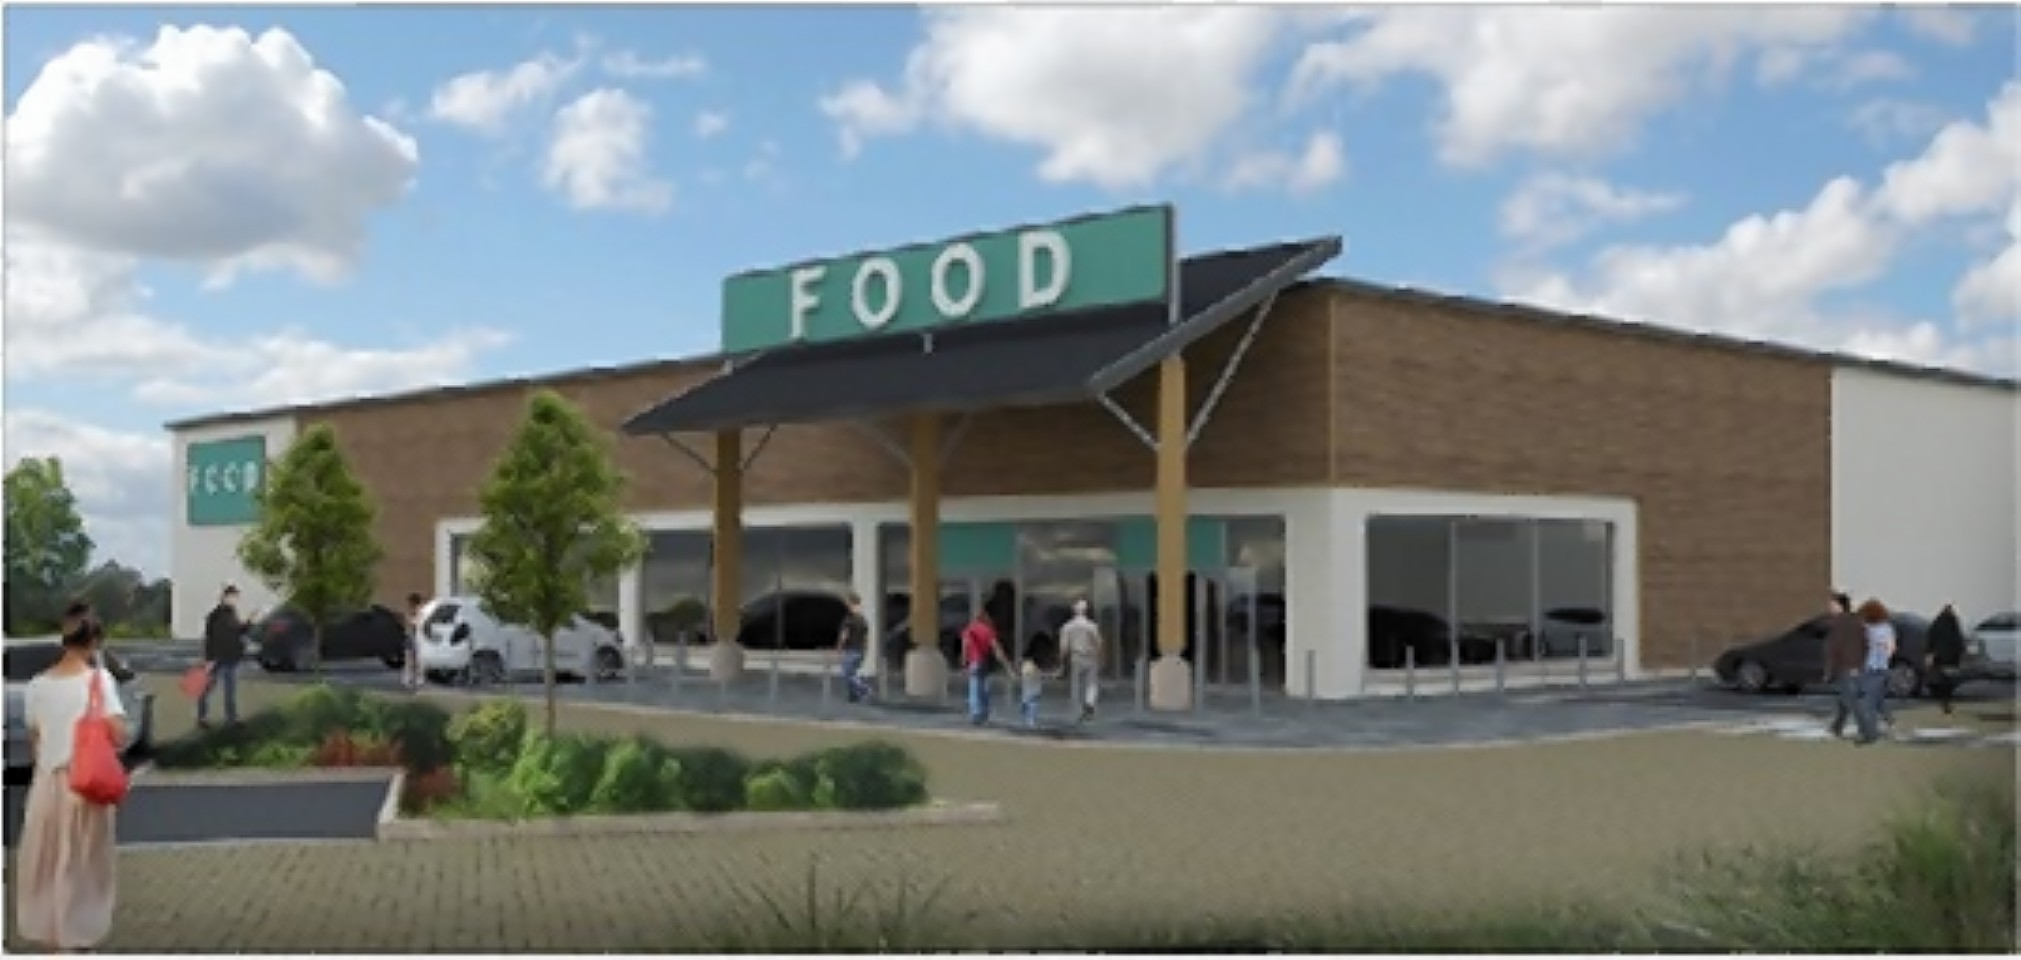 First images of the Stonehaven New Mains supermarket development proposal